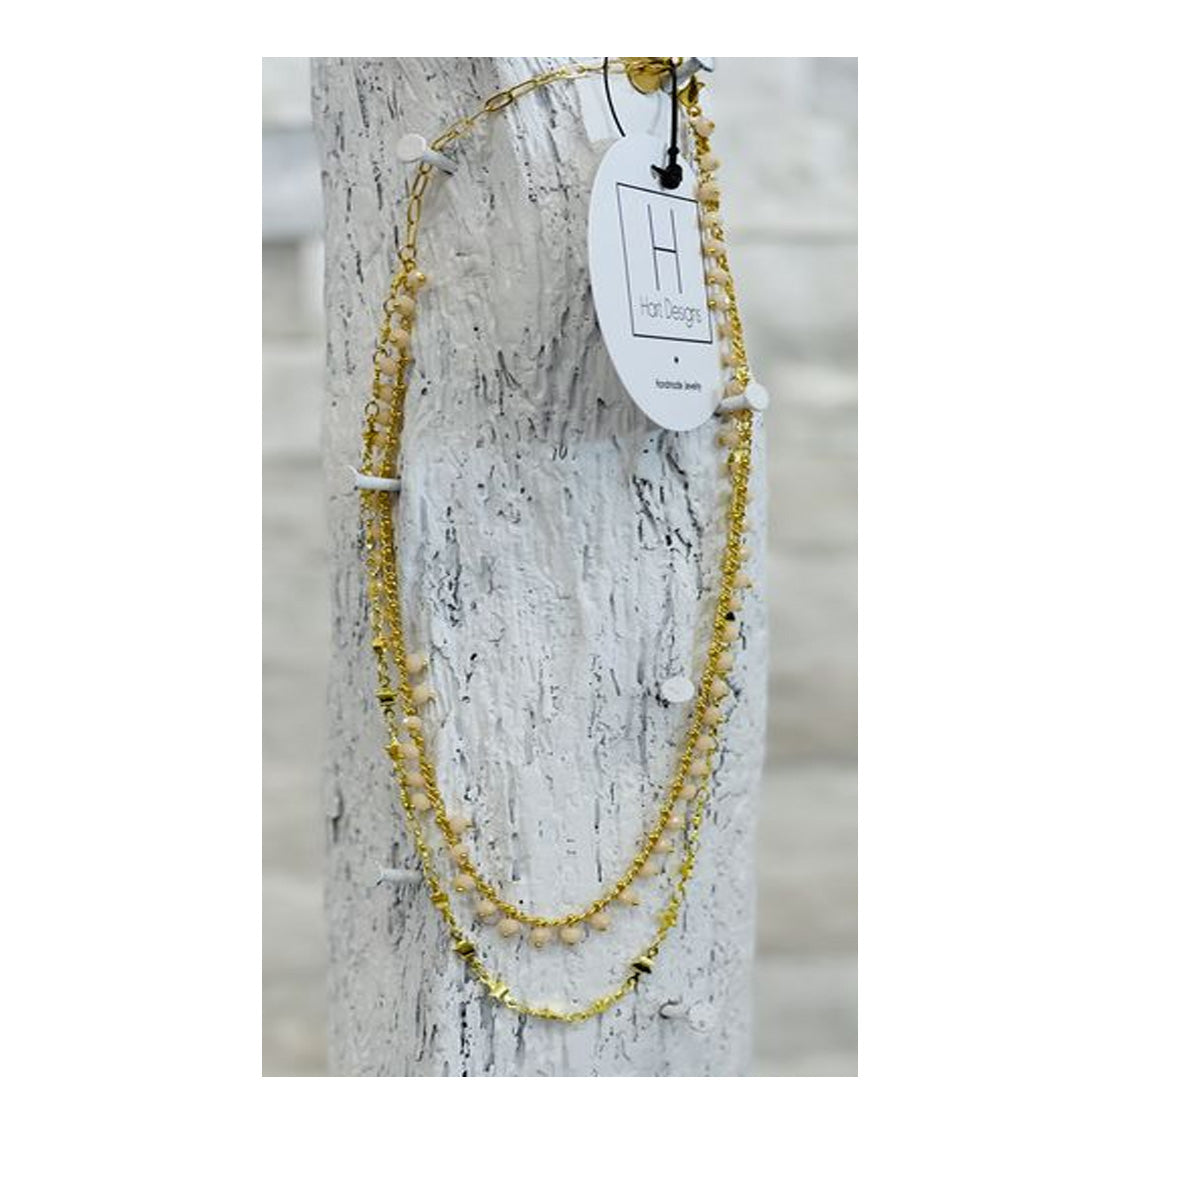 Multi strand gold necklace with beads - Southern Grace Creations